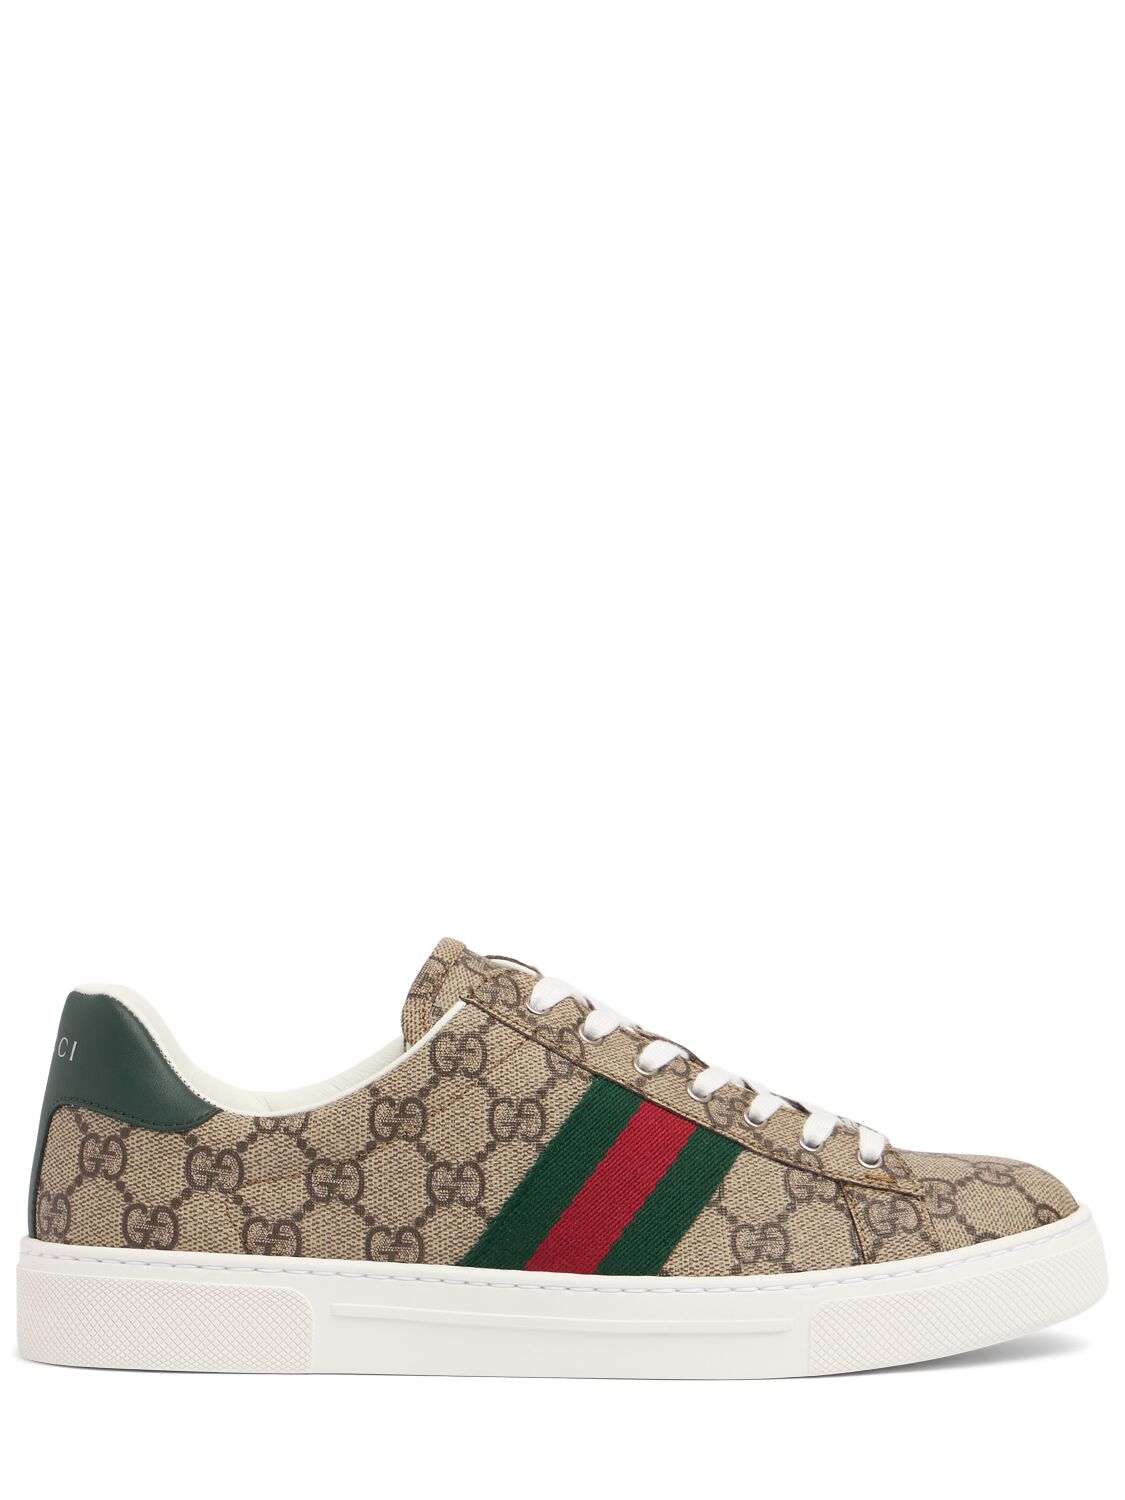 Image of 30mm Gucci Ace Canvas Trainer Sneakers